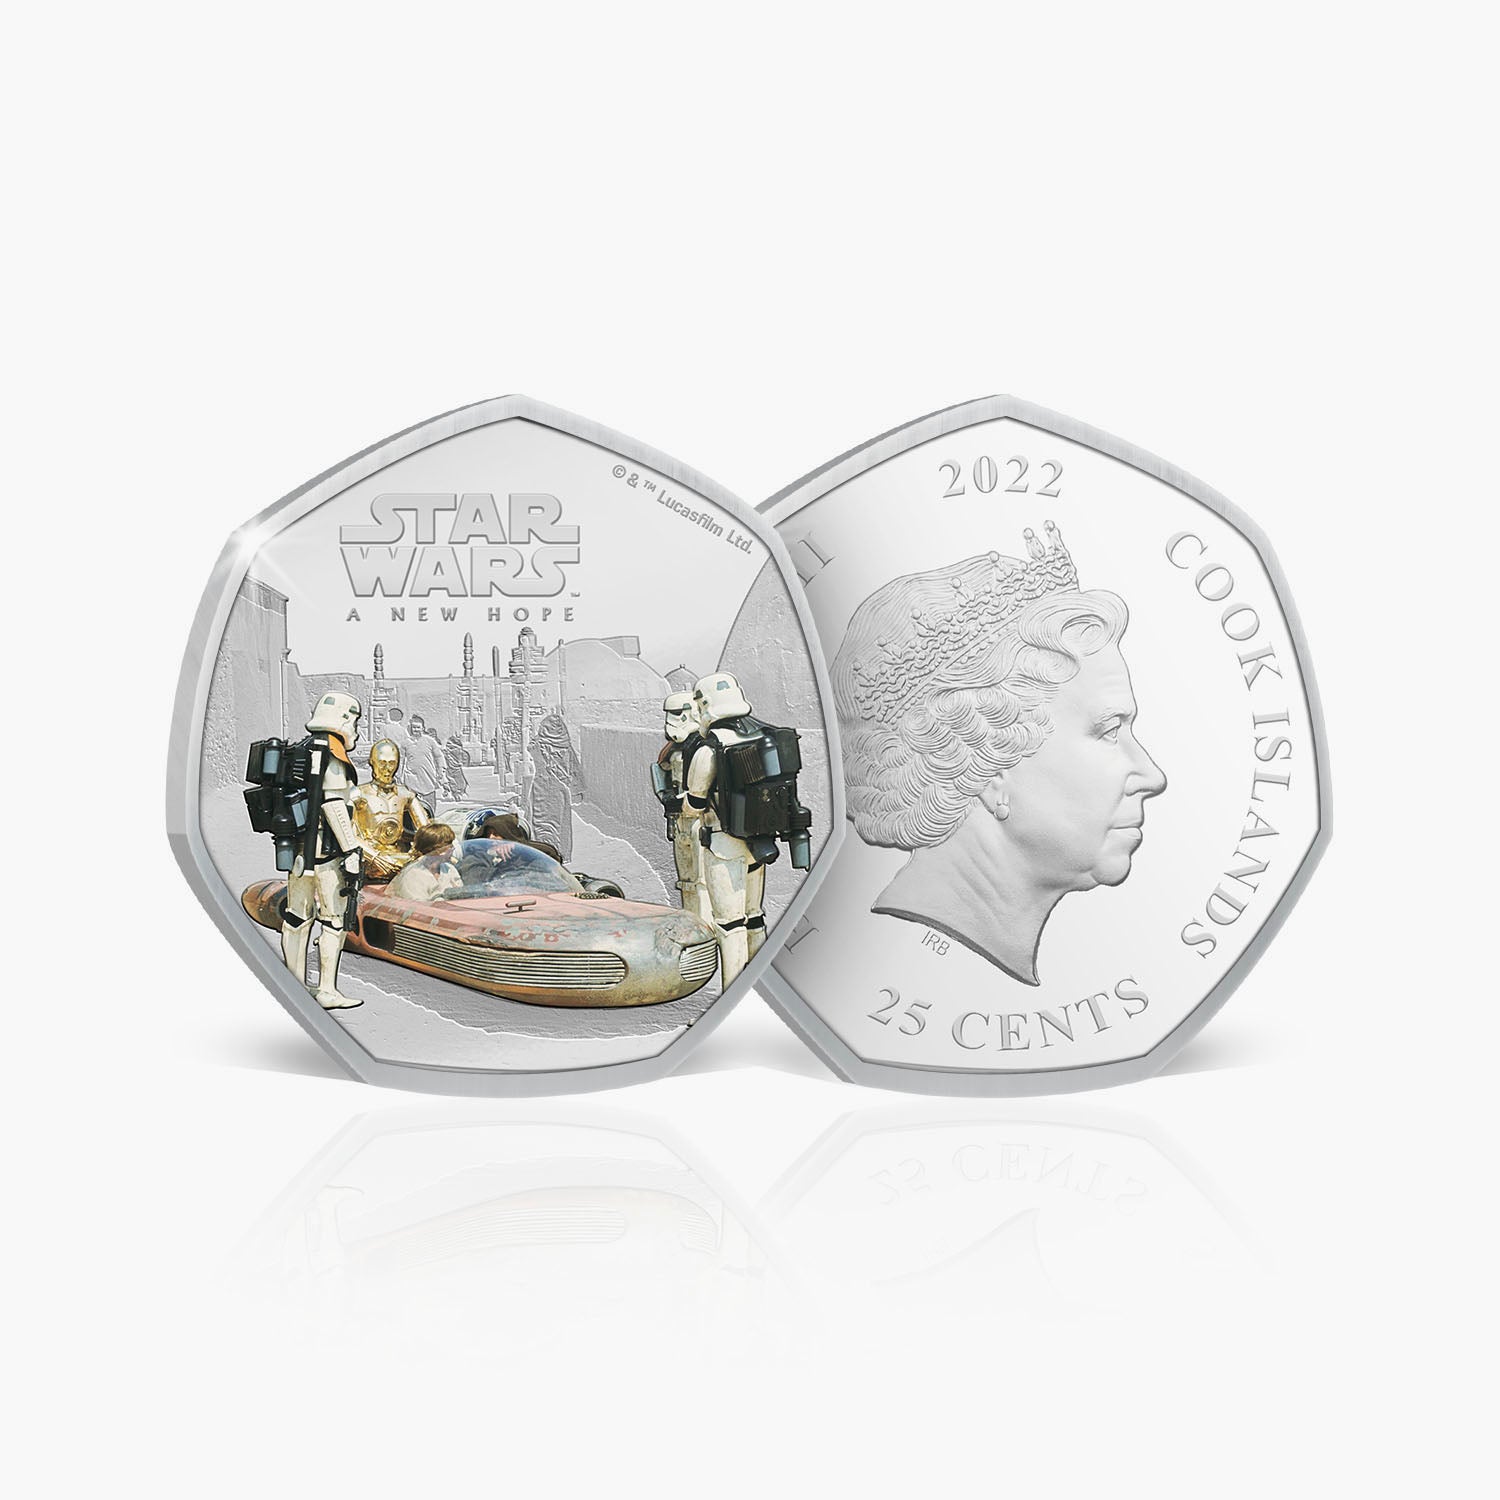 A New Hope - Jedi Mind Trick Silver Plated Coin